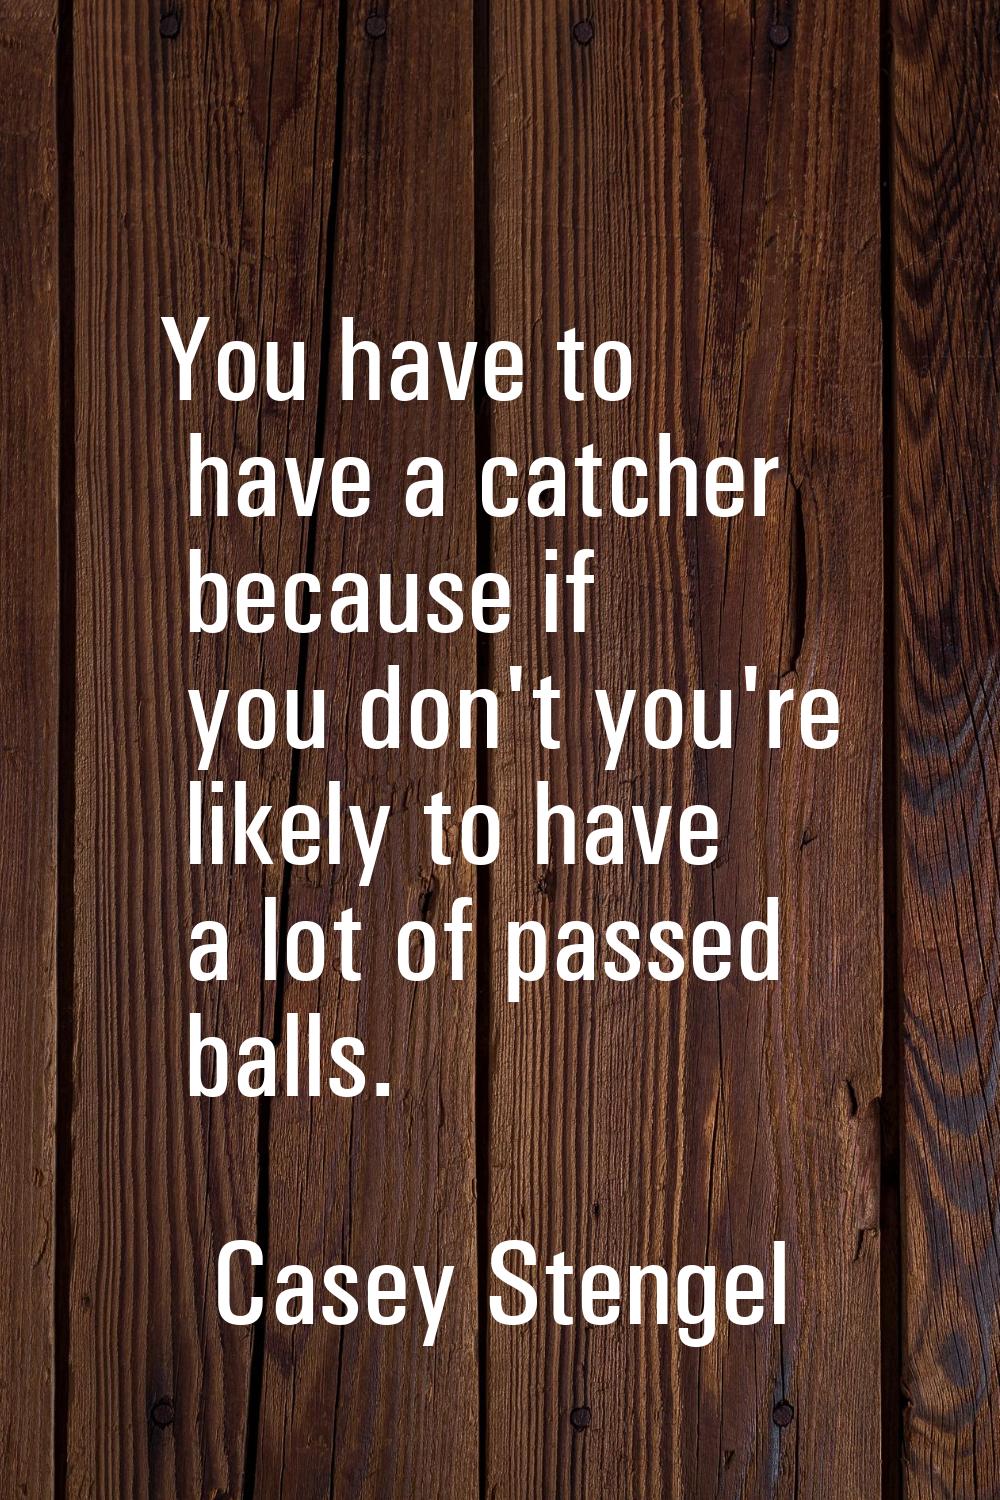 You have to have a catcher because if you don't you're likely to have a lot of passed balls.